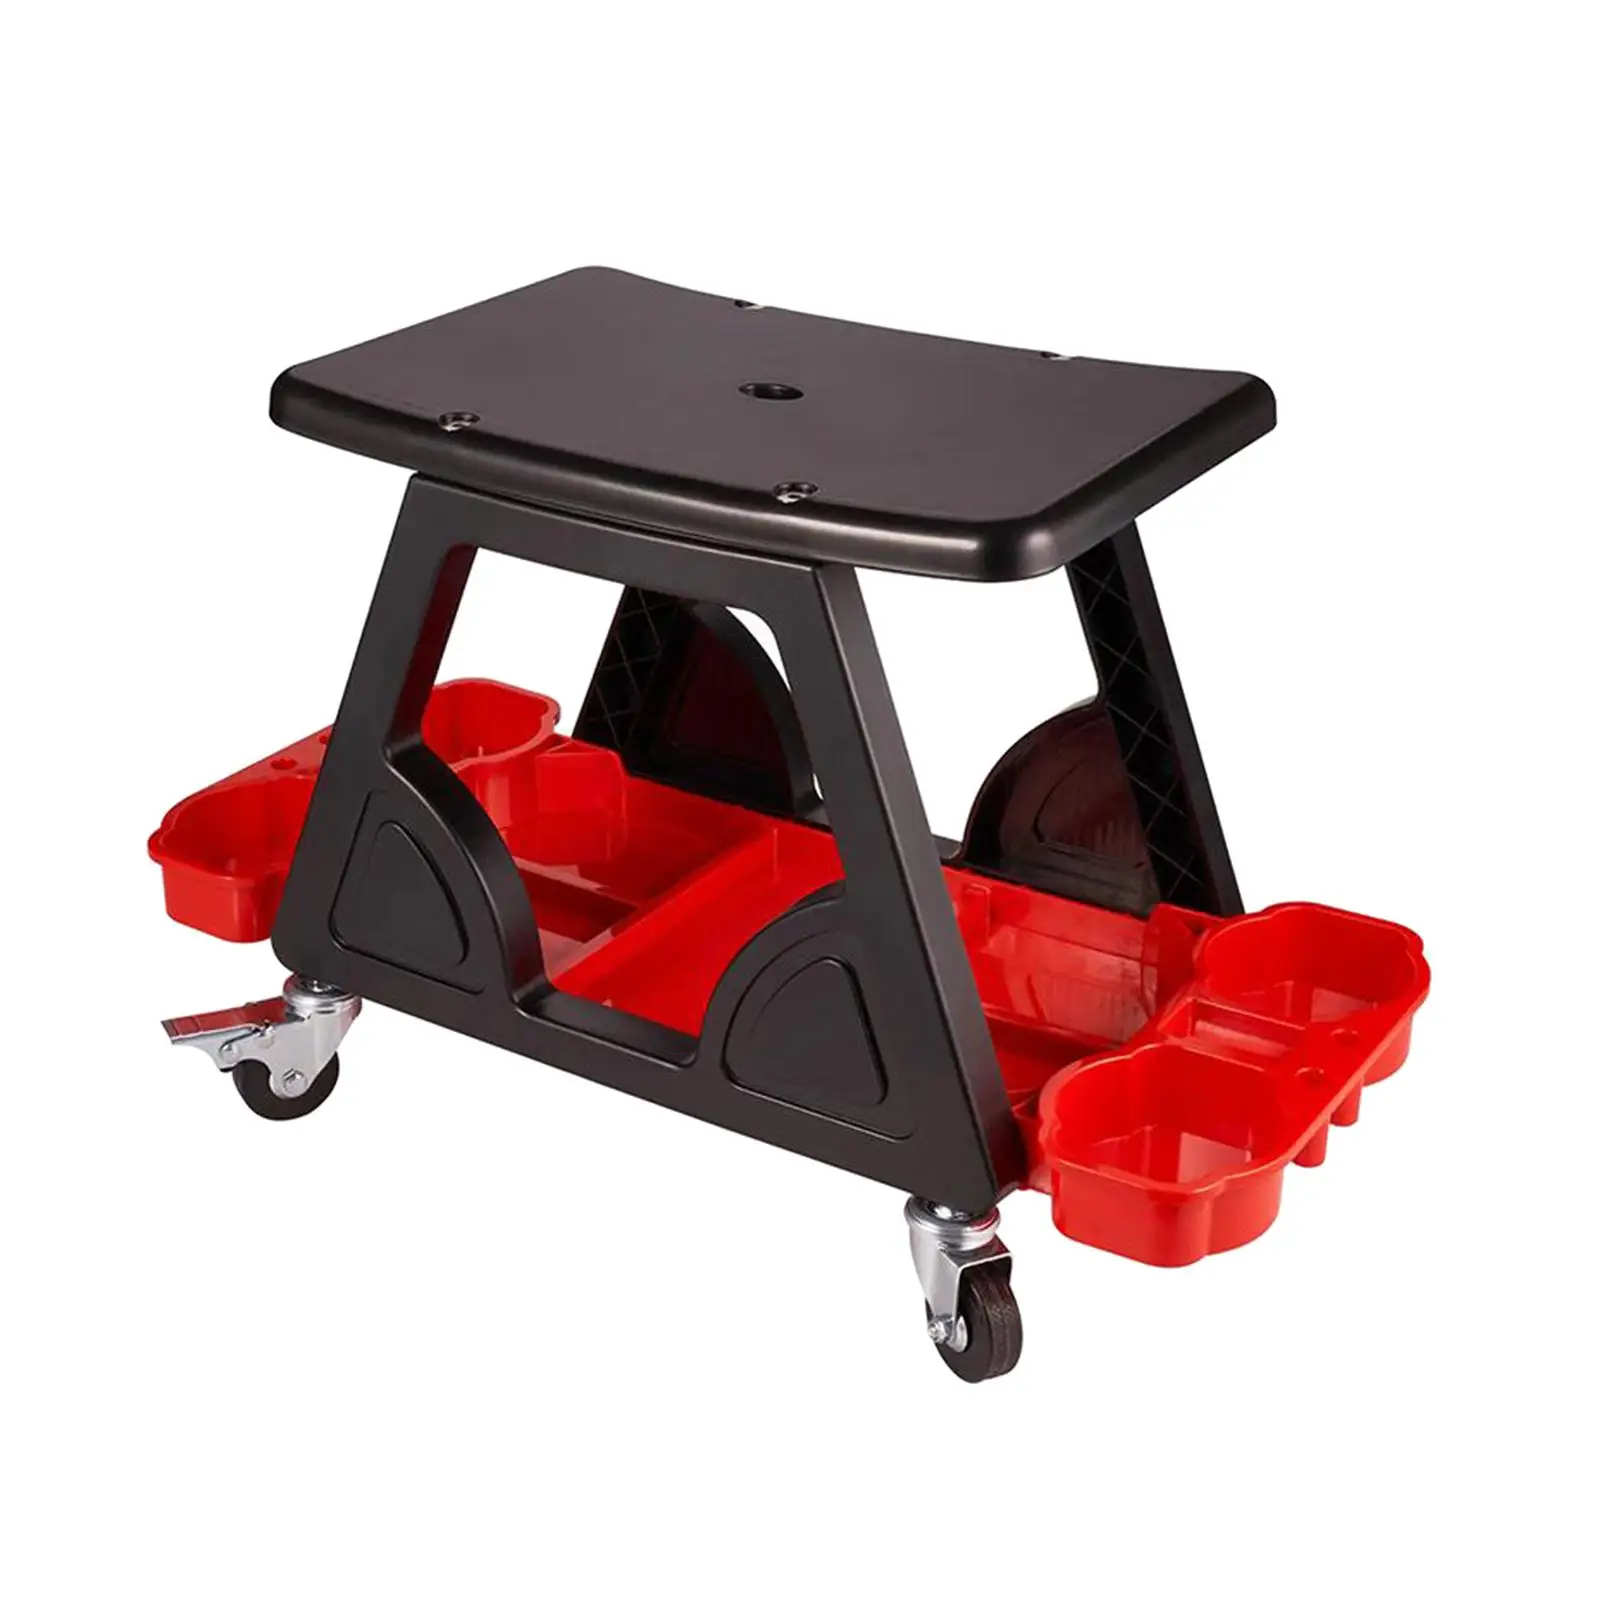 Garage Shop Stool Creeper Creeper Seat Car Detailing Stool Chair Roller images - 6